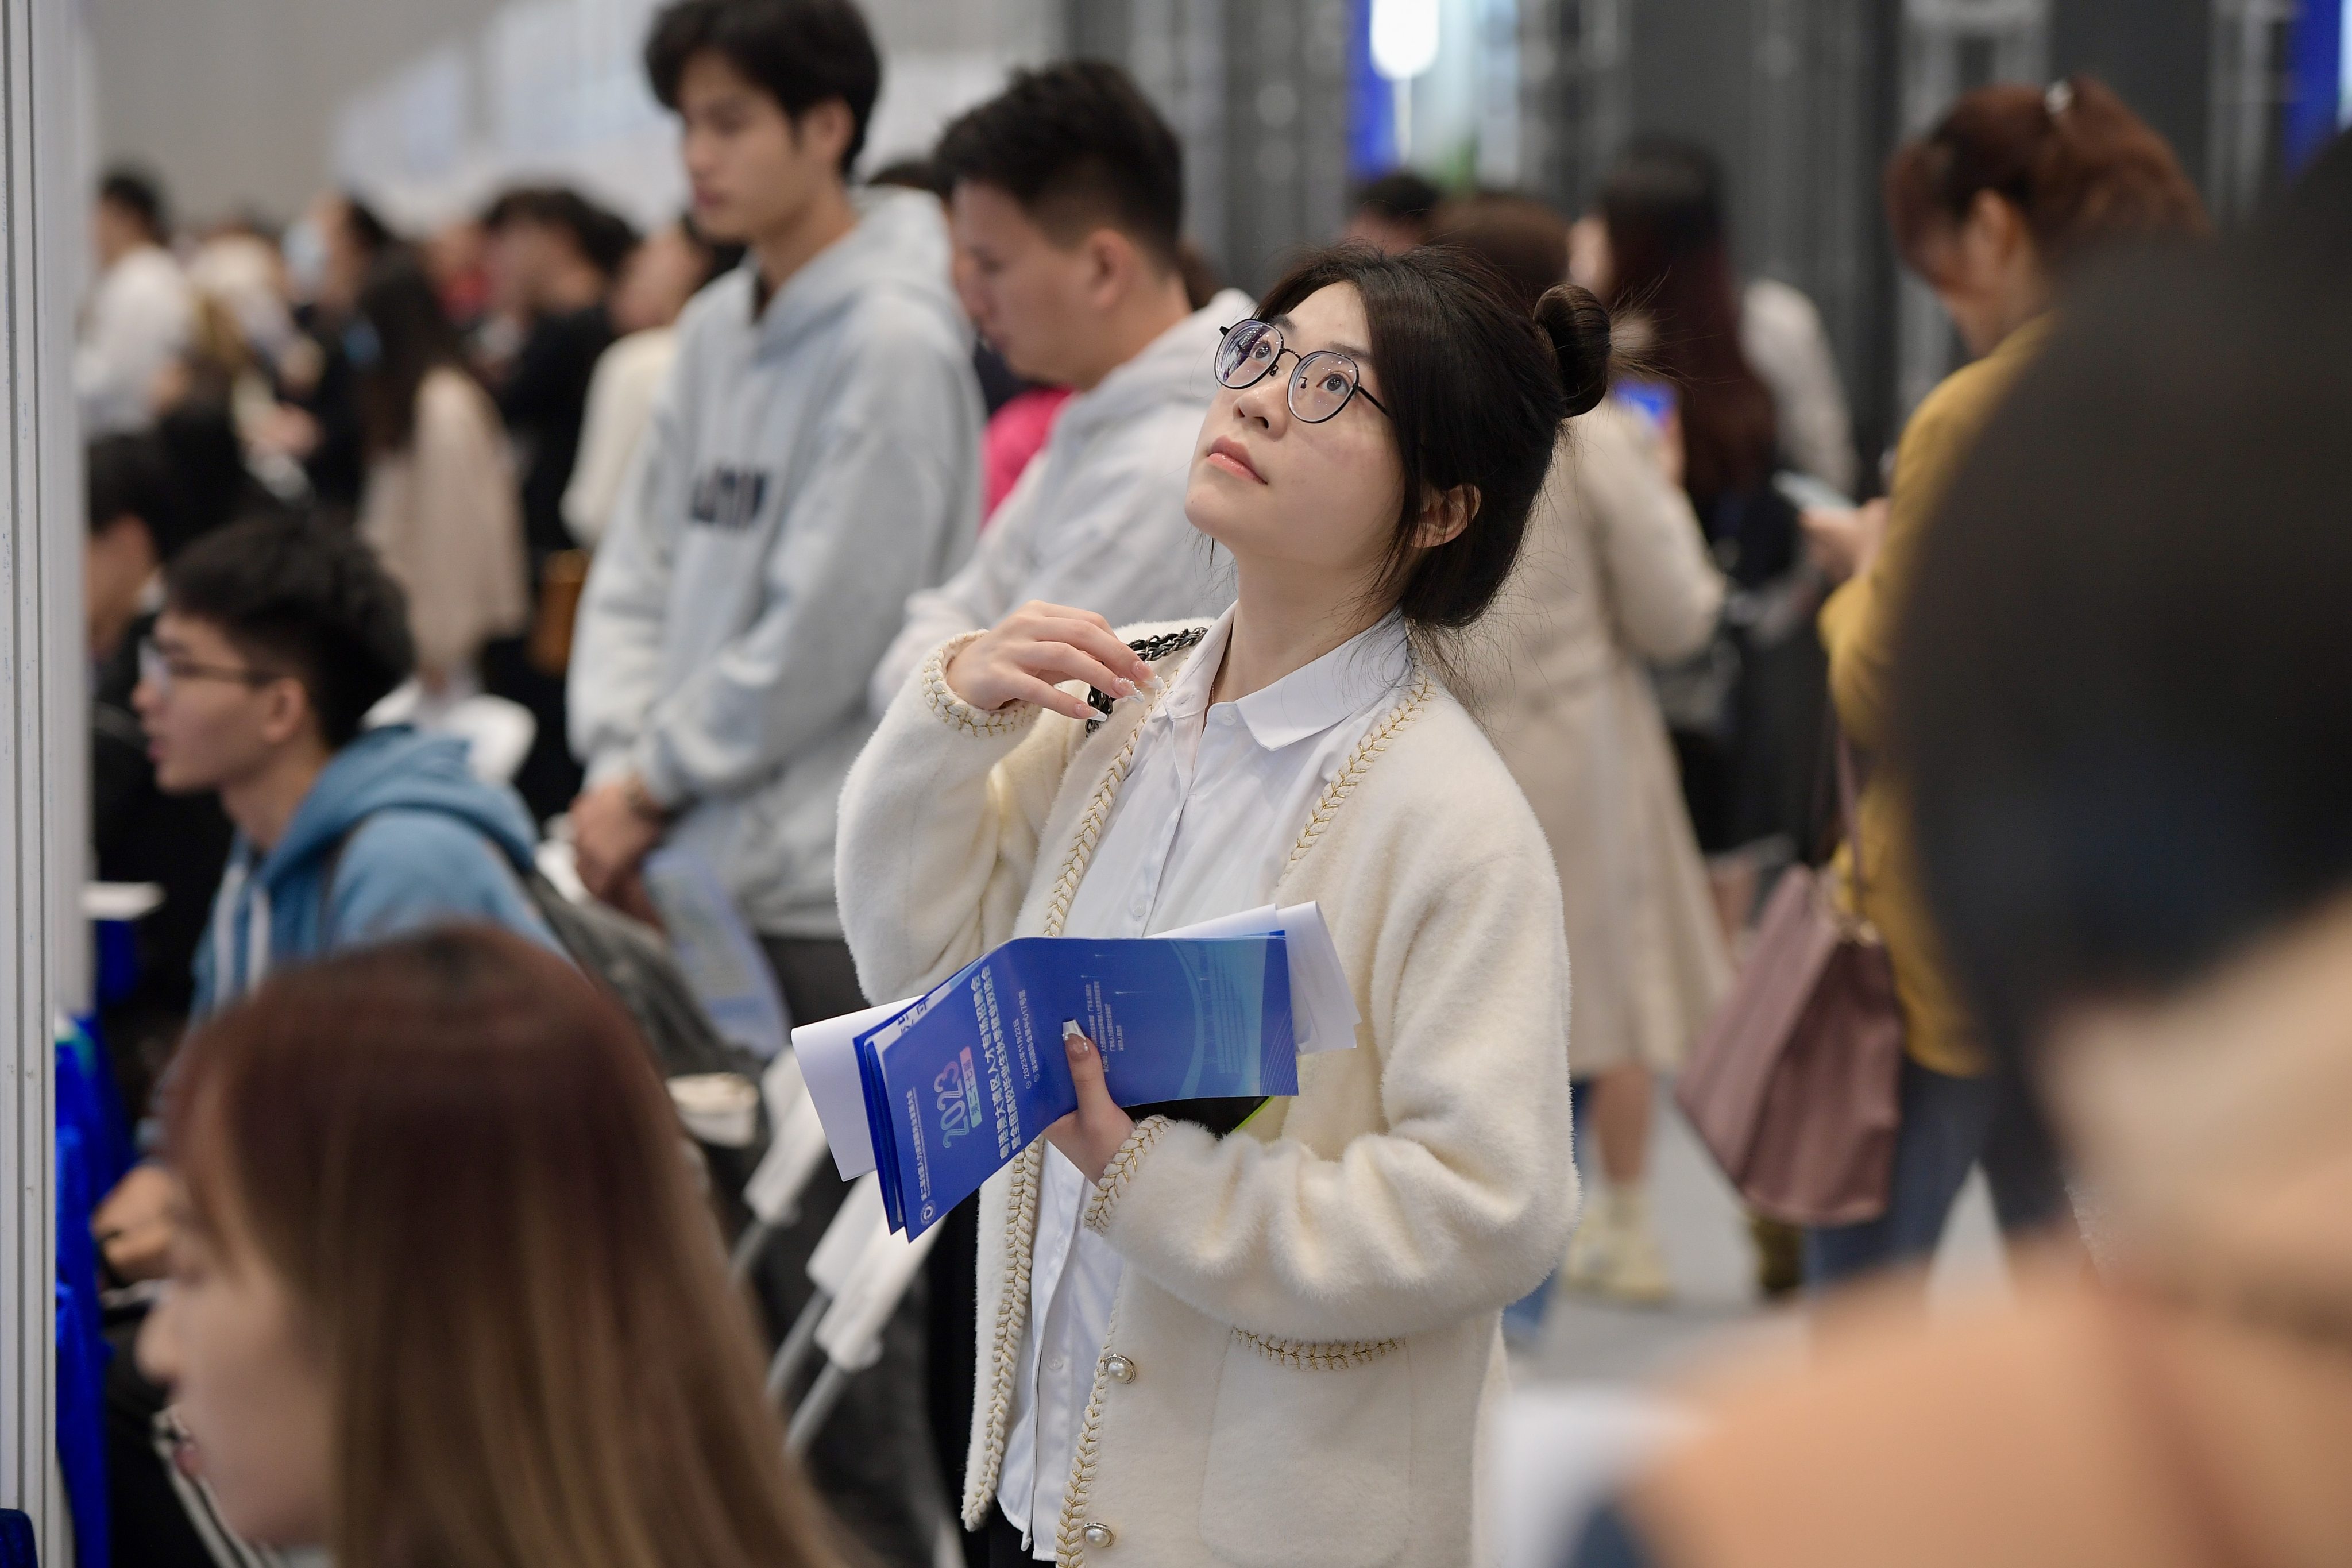 China’s regional authorities, especially in coastal regions, are looking to roll out policies that support economic growth and add jobs. Photo: Getty Images